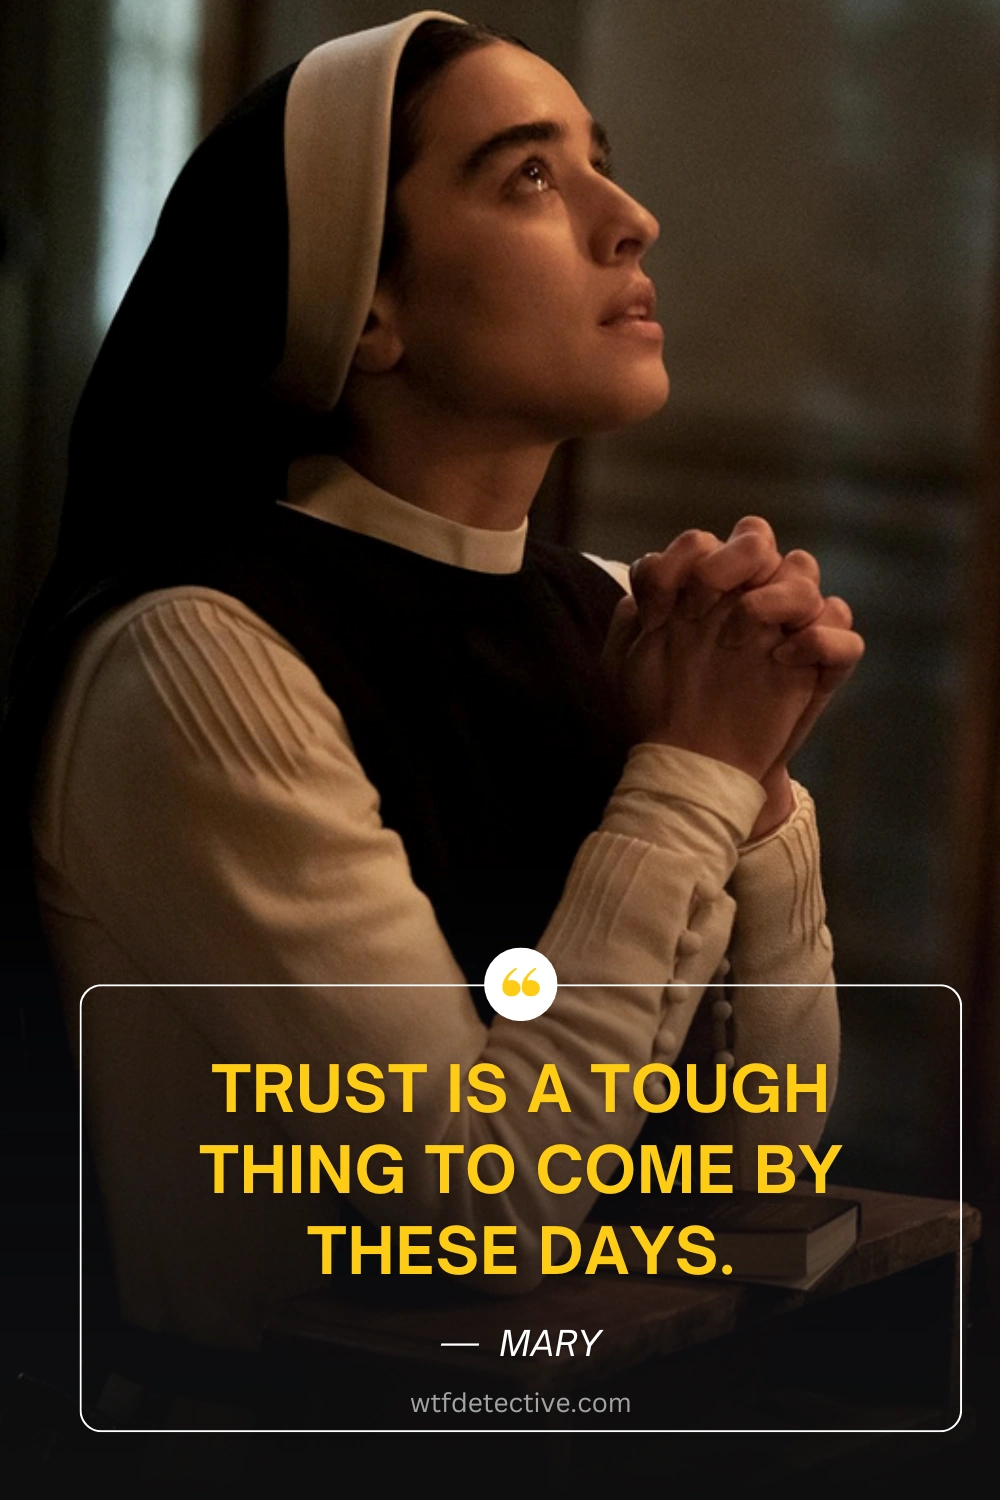 Simona Tabasco in Immaculate (2024), immaculate 2024 movie quotes, 2024 horror movie quotes, trust is a tough thing quote